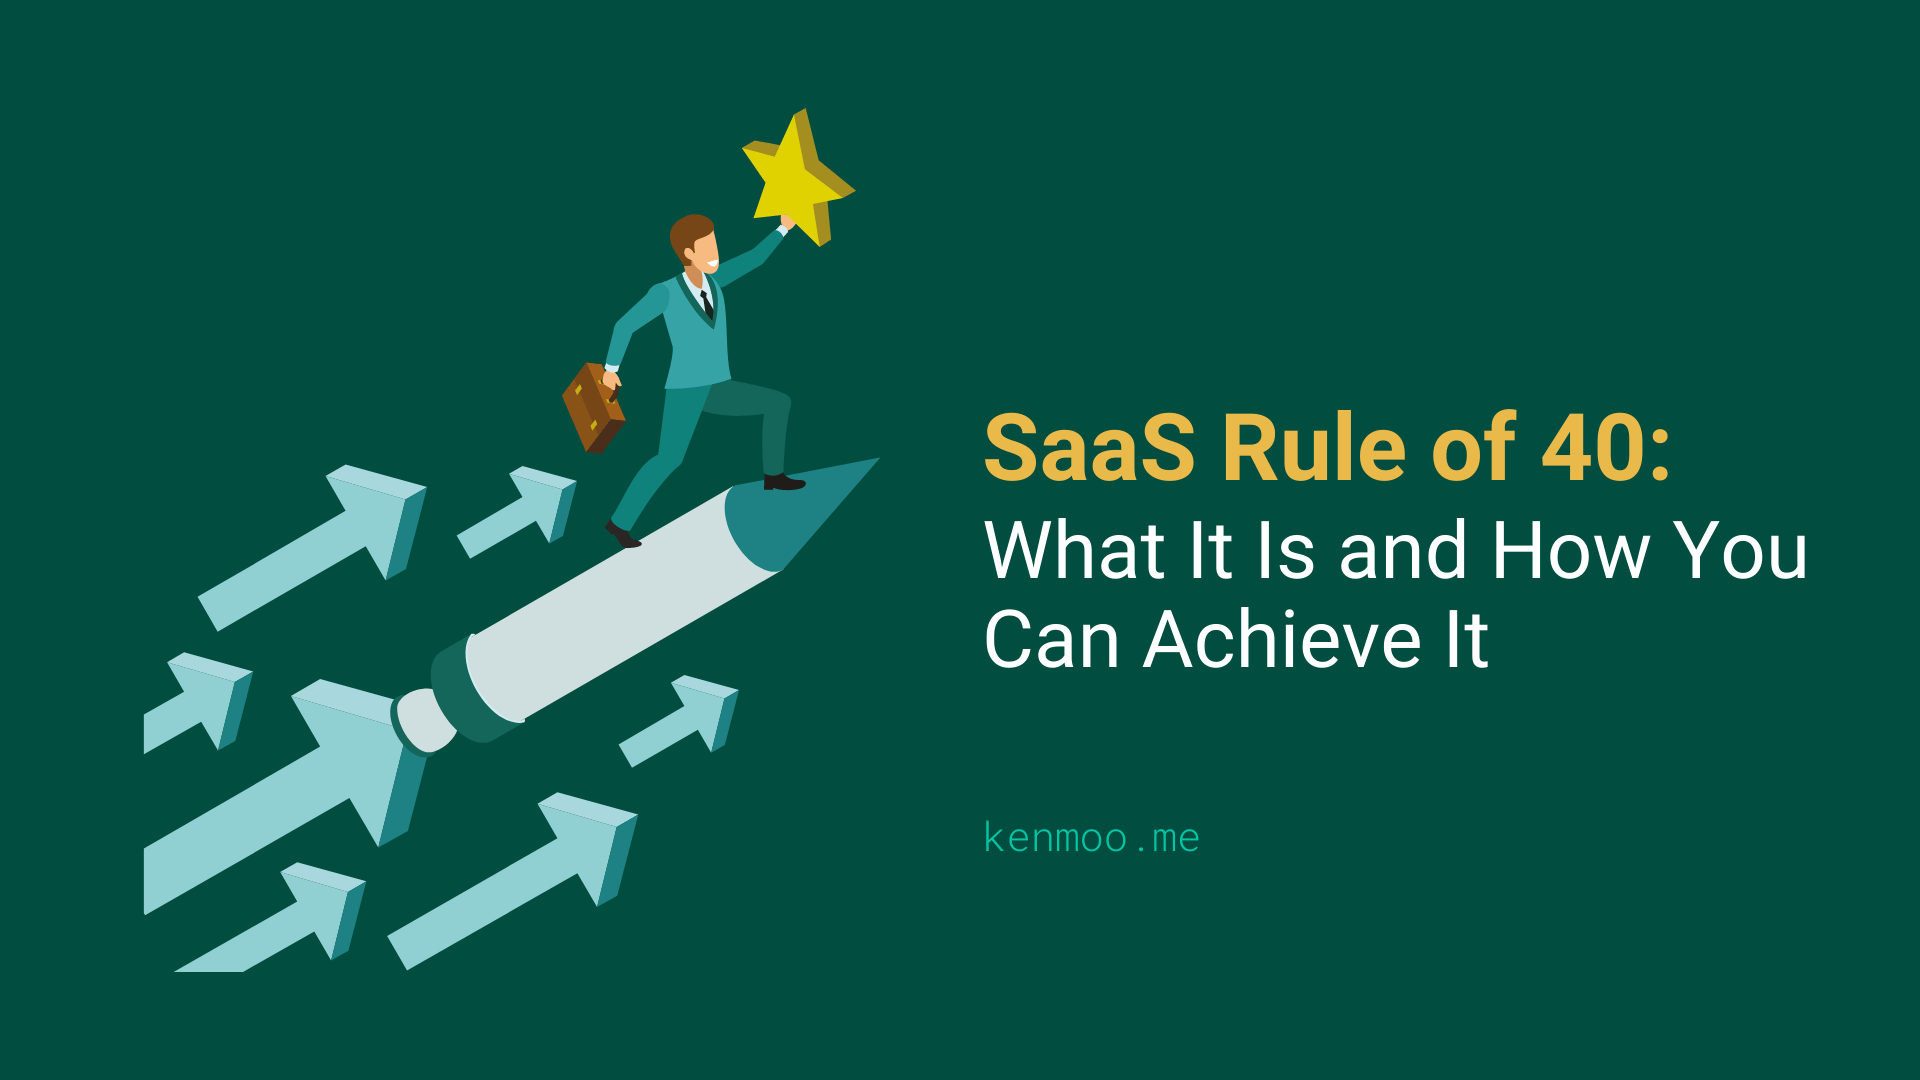 The SaaS Rule of 40: What It Is and How You Can Achieve It